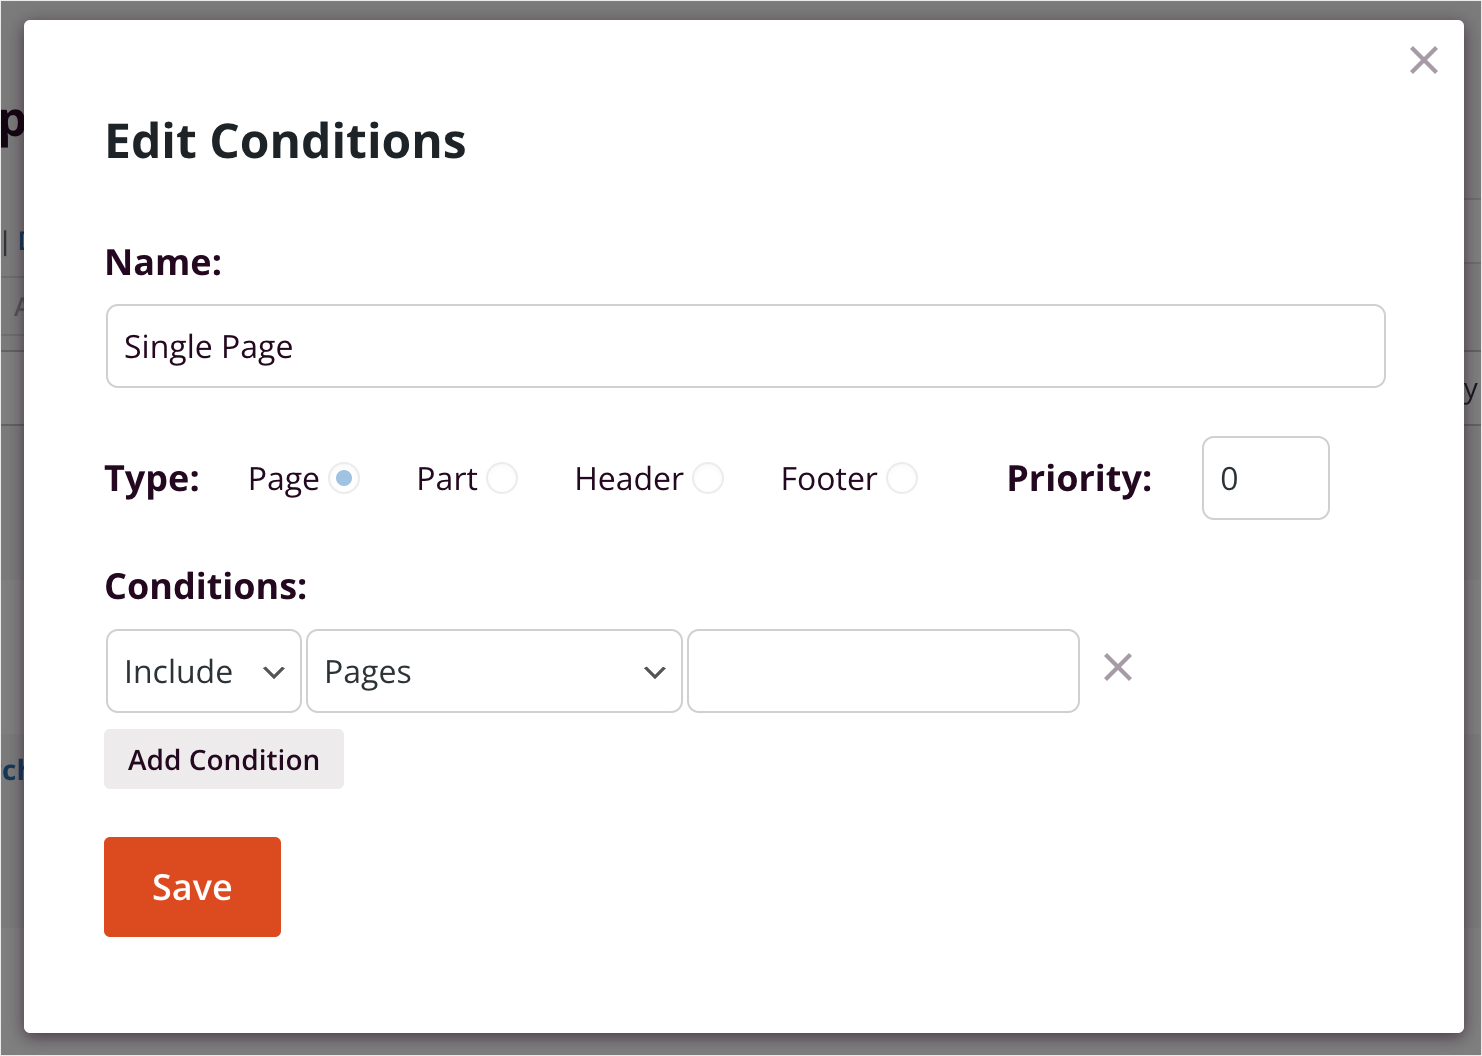 edit the page conditions